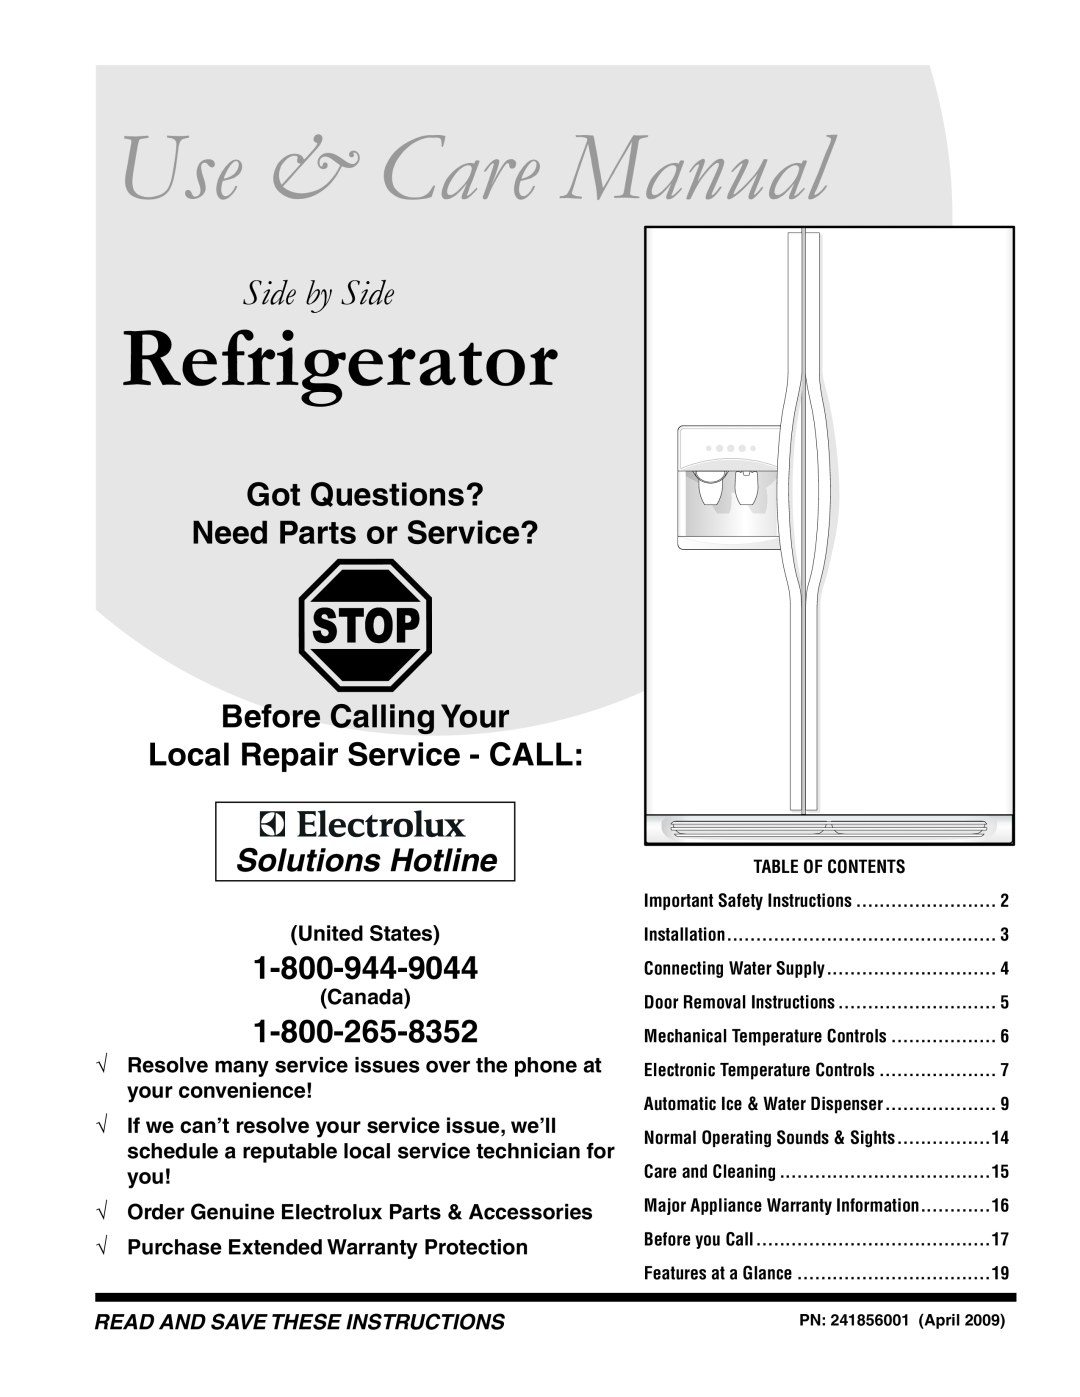 Frigidaire 241856001 important safety instructions United States, Canada, √ Order Genuine Electrolux Parts & Accessories 